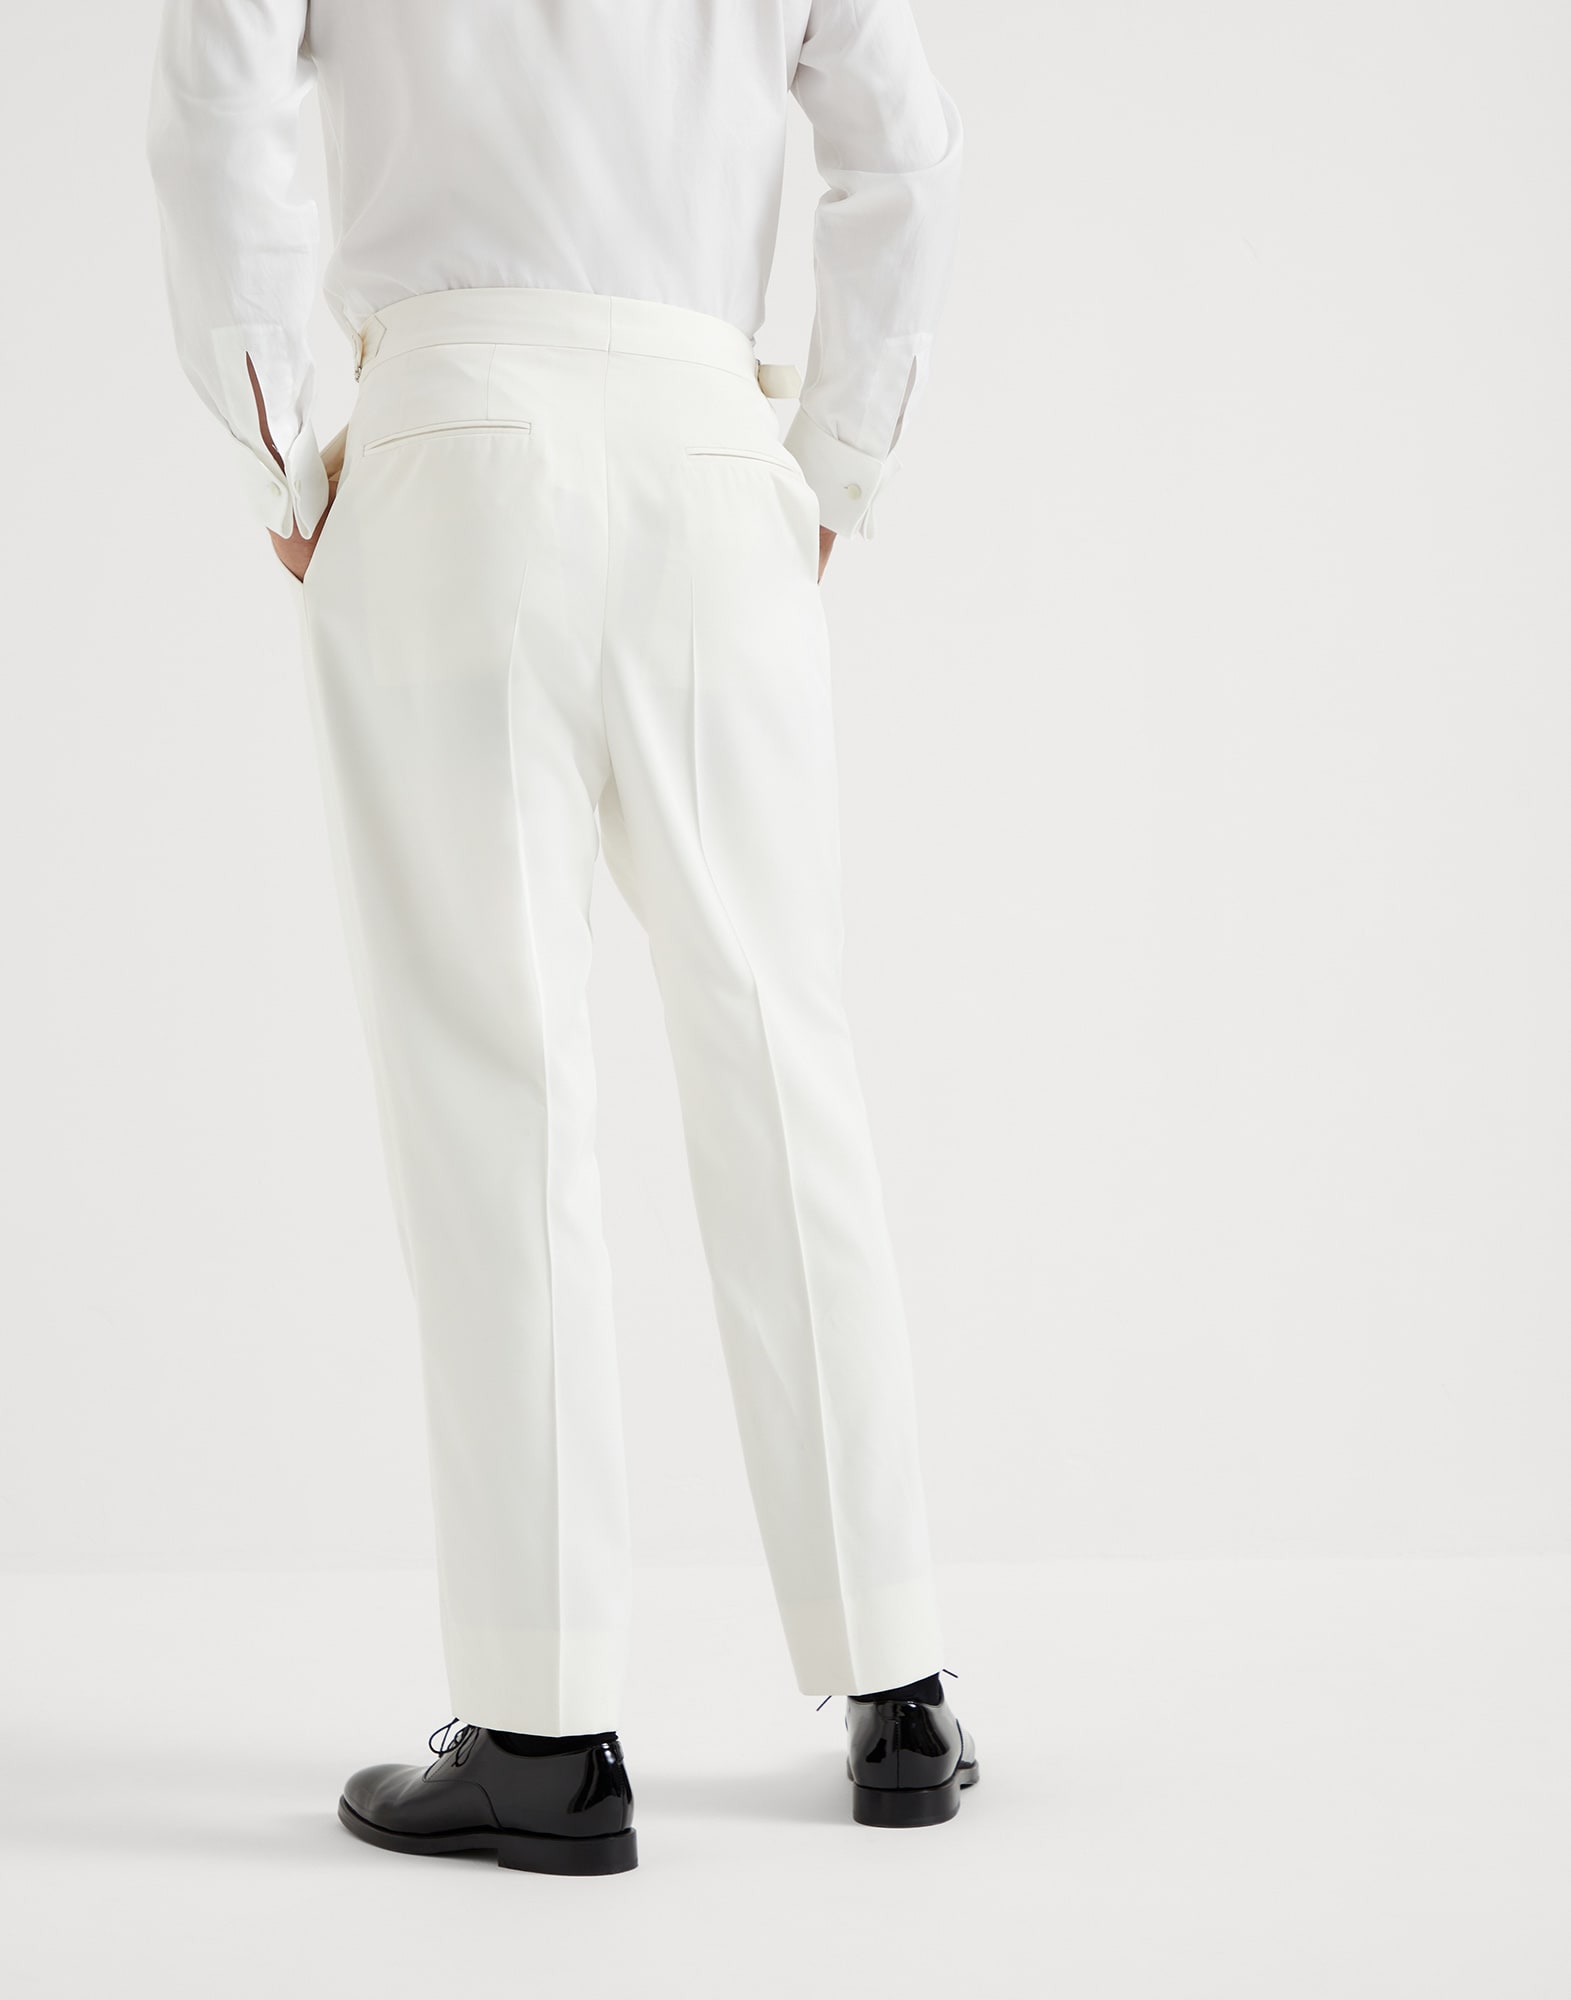 Tuxedo trousers (241MB412PS00) for Man | Brunello Cucinelli